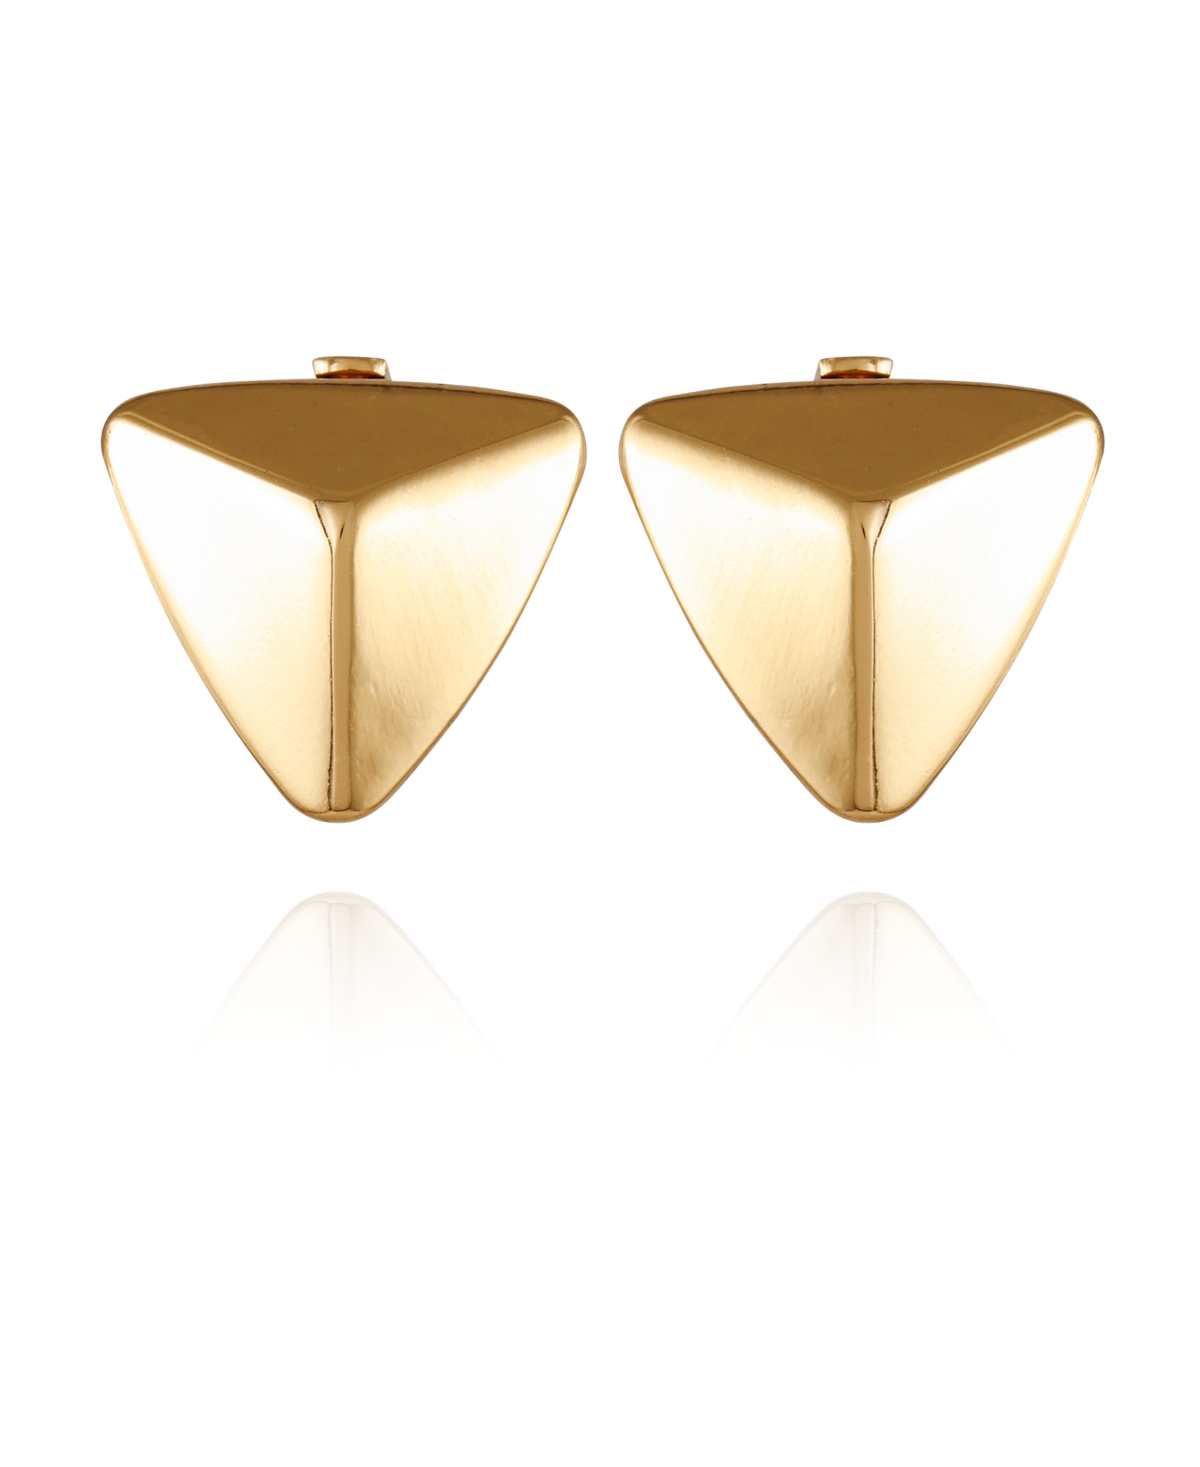 Gold-Tone Pyramid Clip On Earrings - Gold